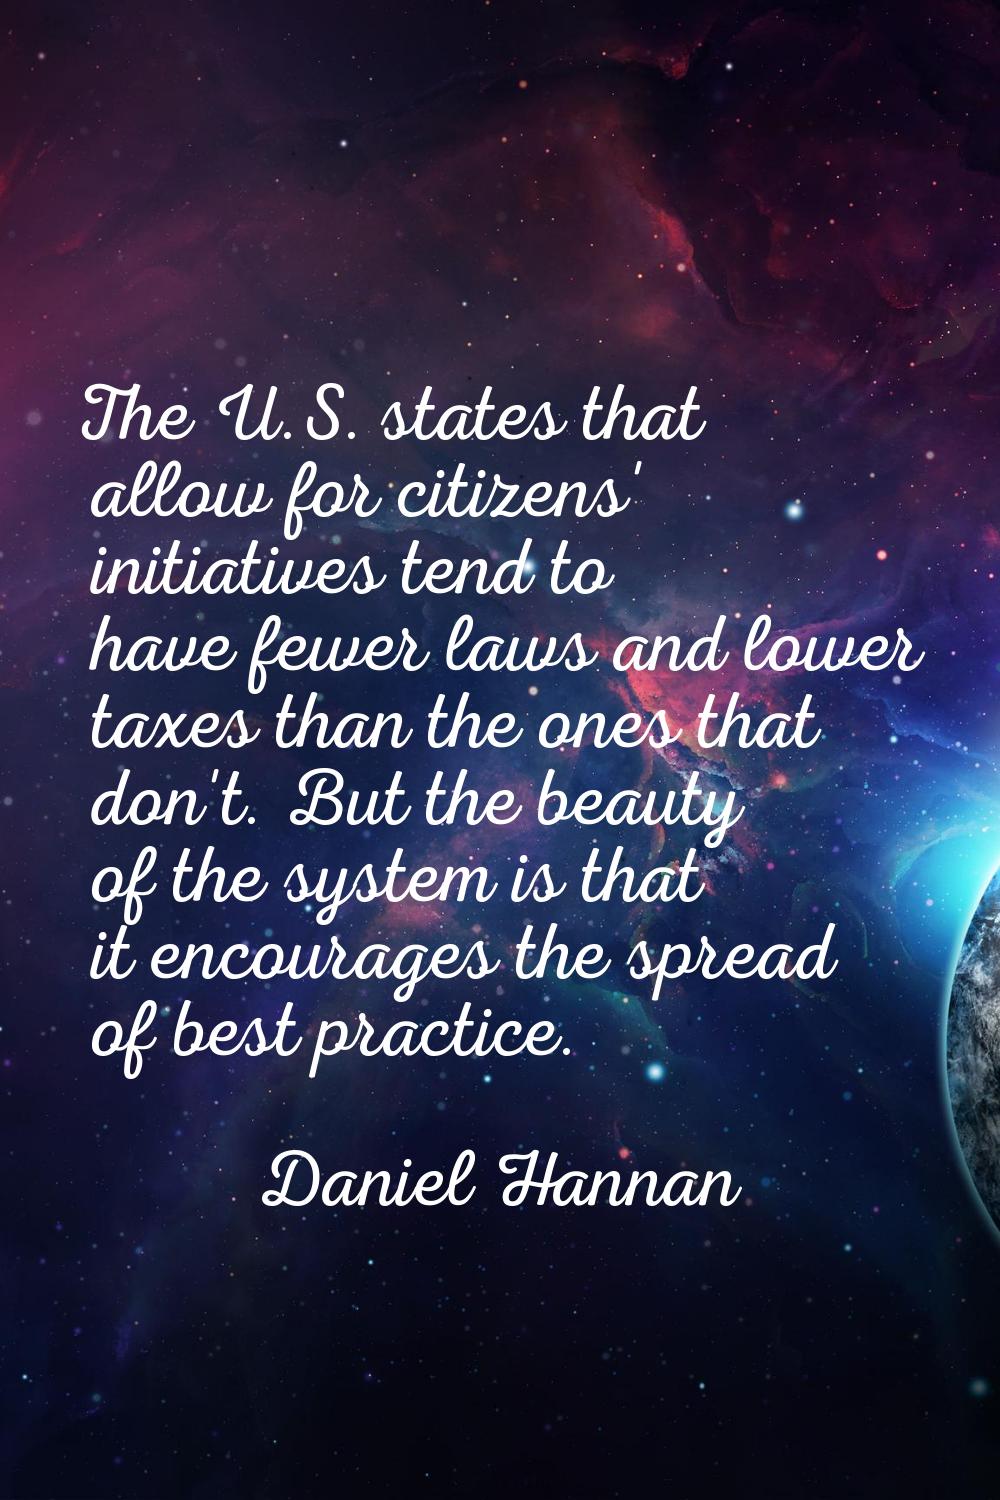 The U.S. states that allow for citizens' initiatives tend to have fewer laws and lower taxes than t